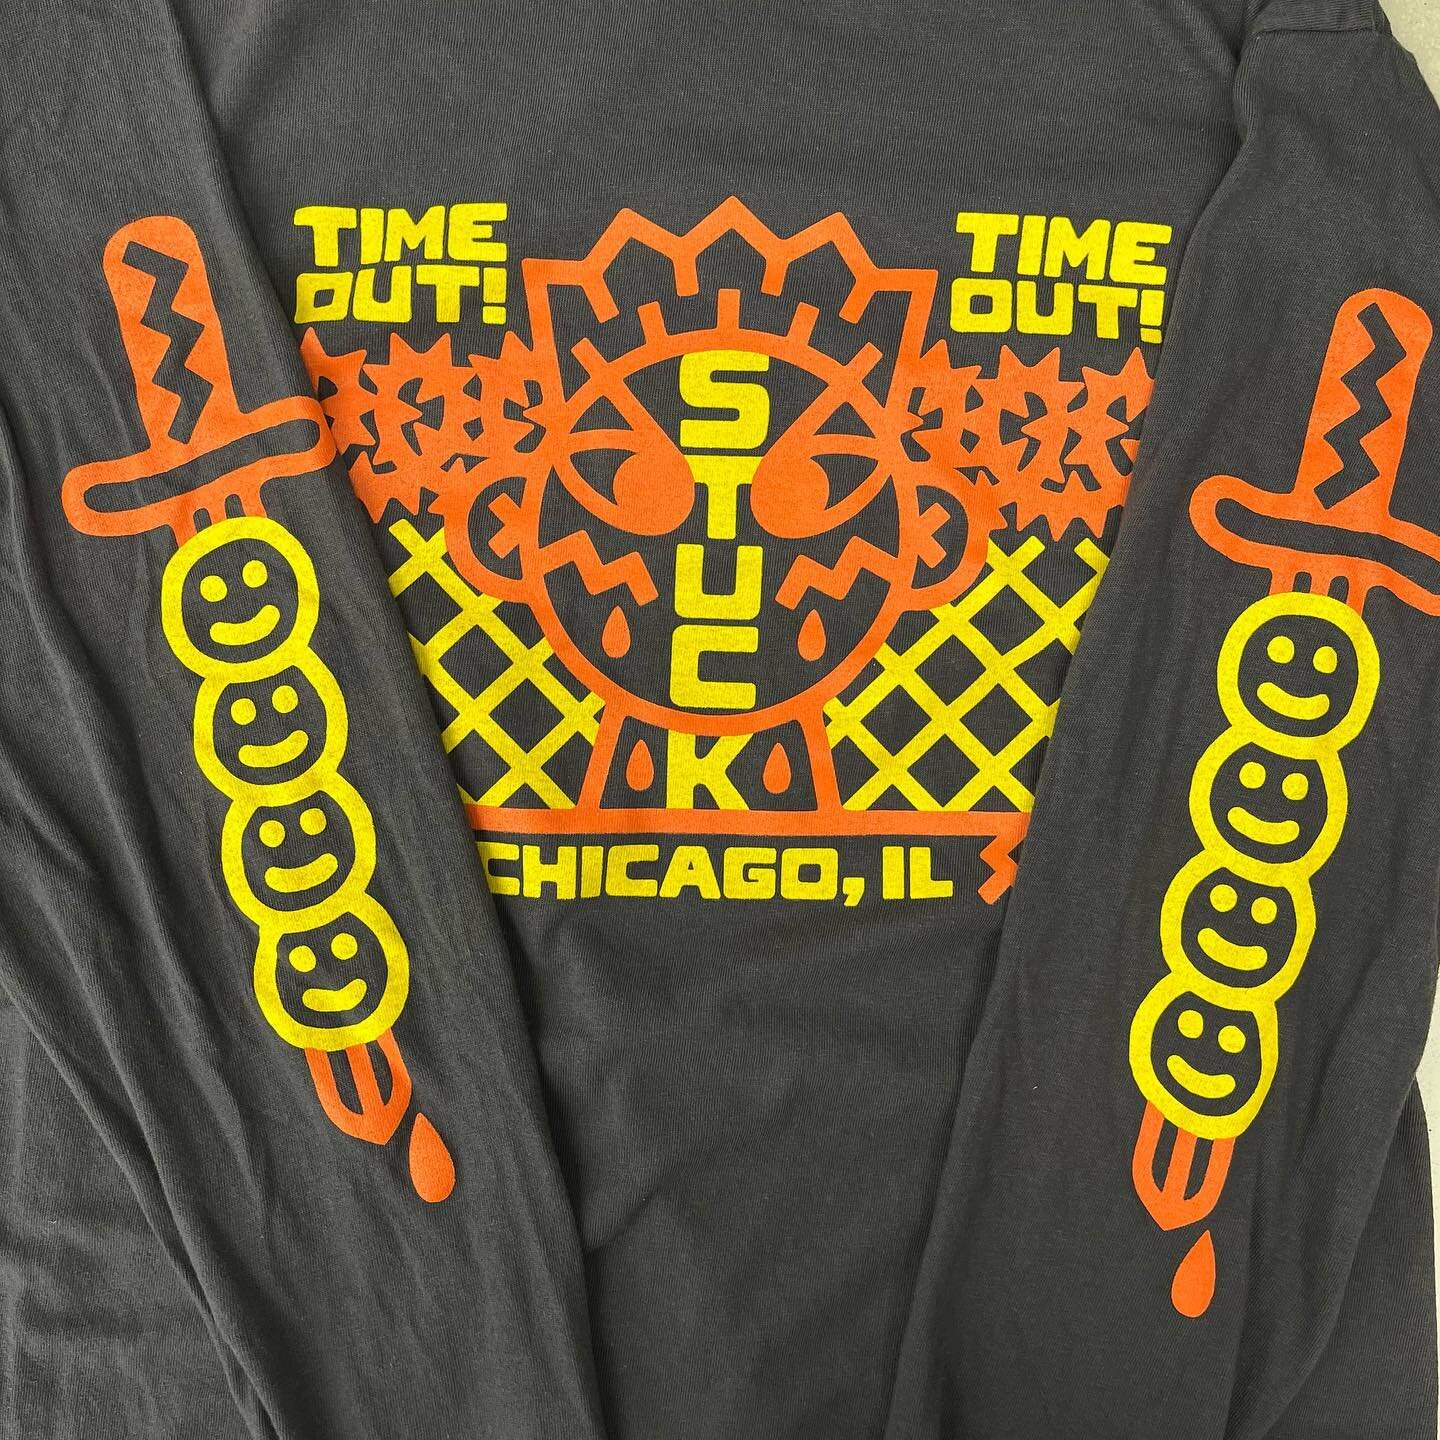 Long sleeve tour tees for @stuck.chi! Art by @wygrant, printed on @comfortcolors_ long sleeves 🍂🍁

💥🏠💥

#explodinghouseprinting #stuckchi #stuck #stuckband #screenprinting #pantone #bandmerch #chicagoscreenprinting #comfortcolors #chicago #sleev